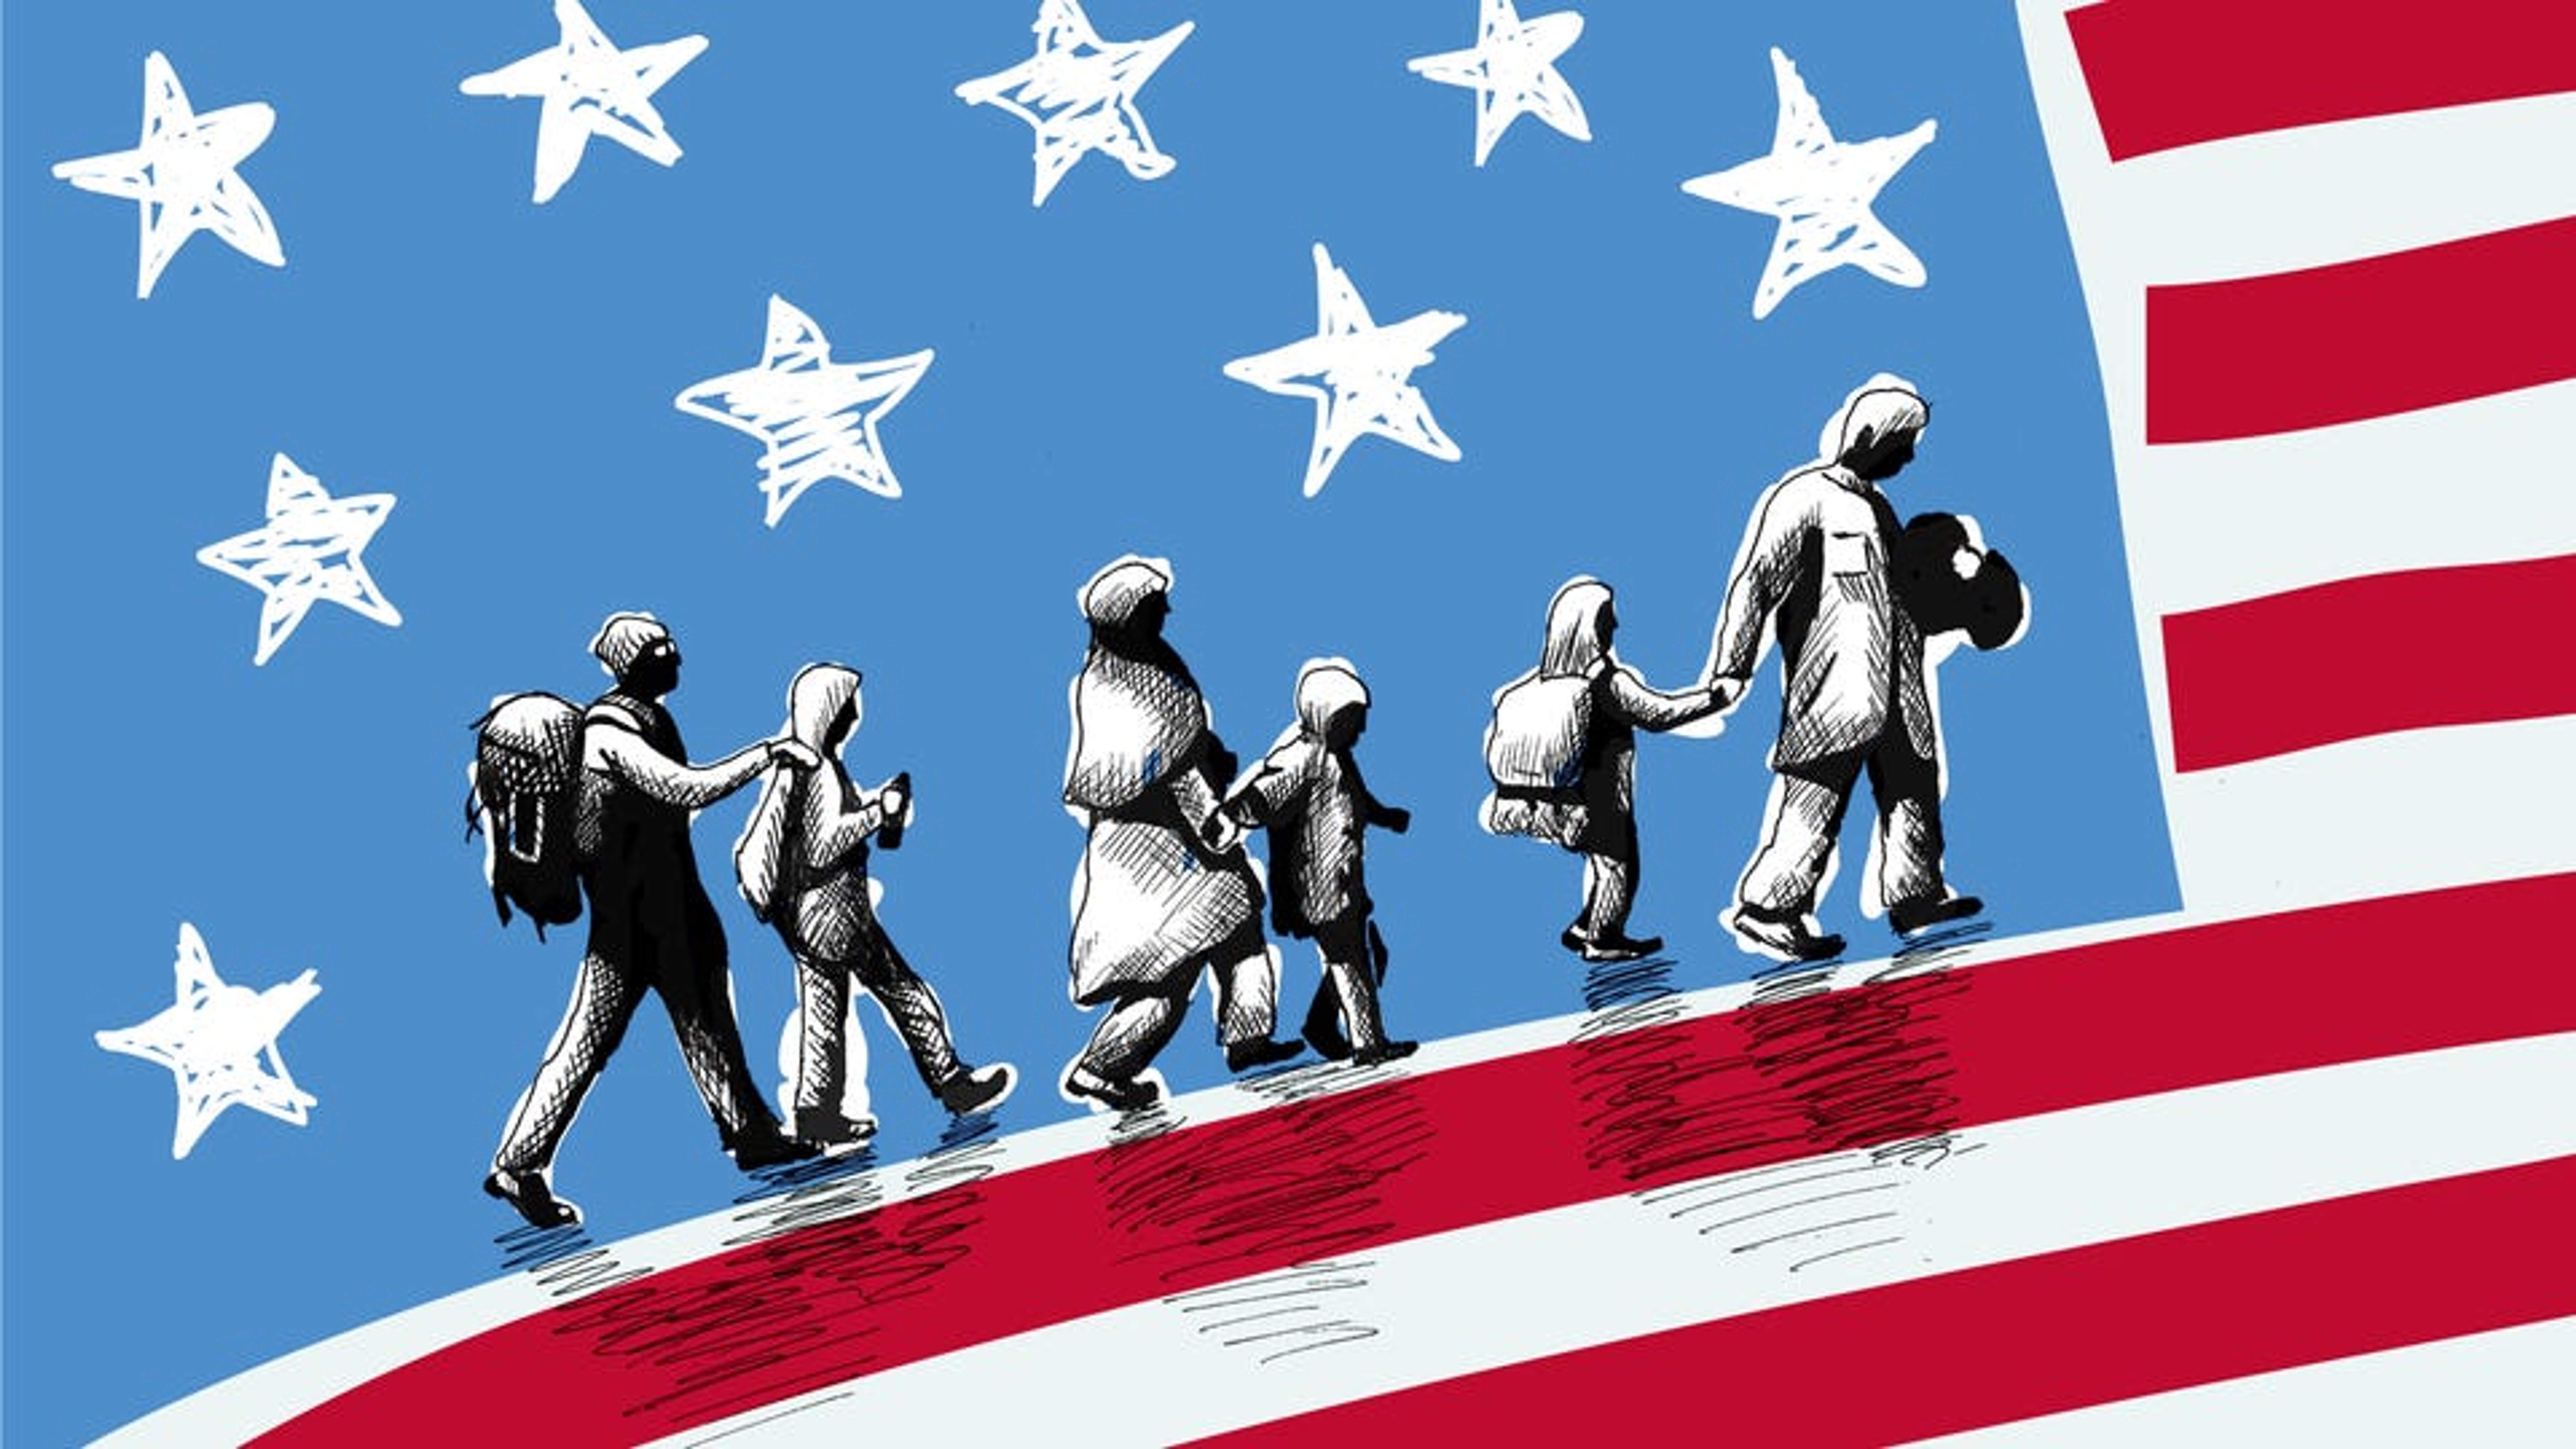 Illustration of an American flag with migrants walking across one of the stripes.